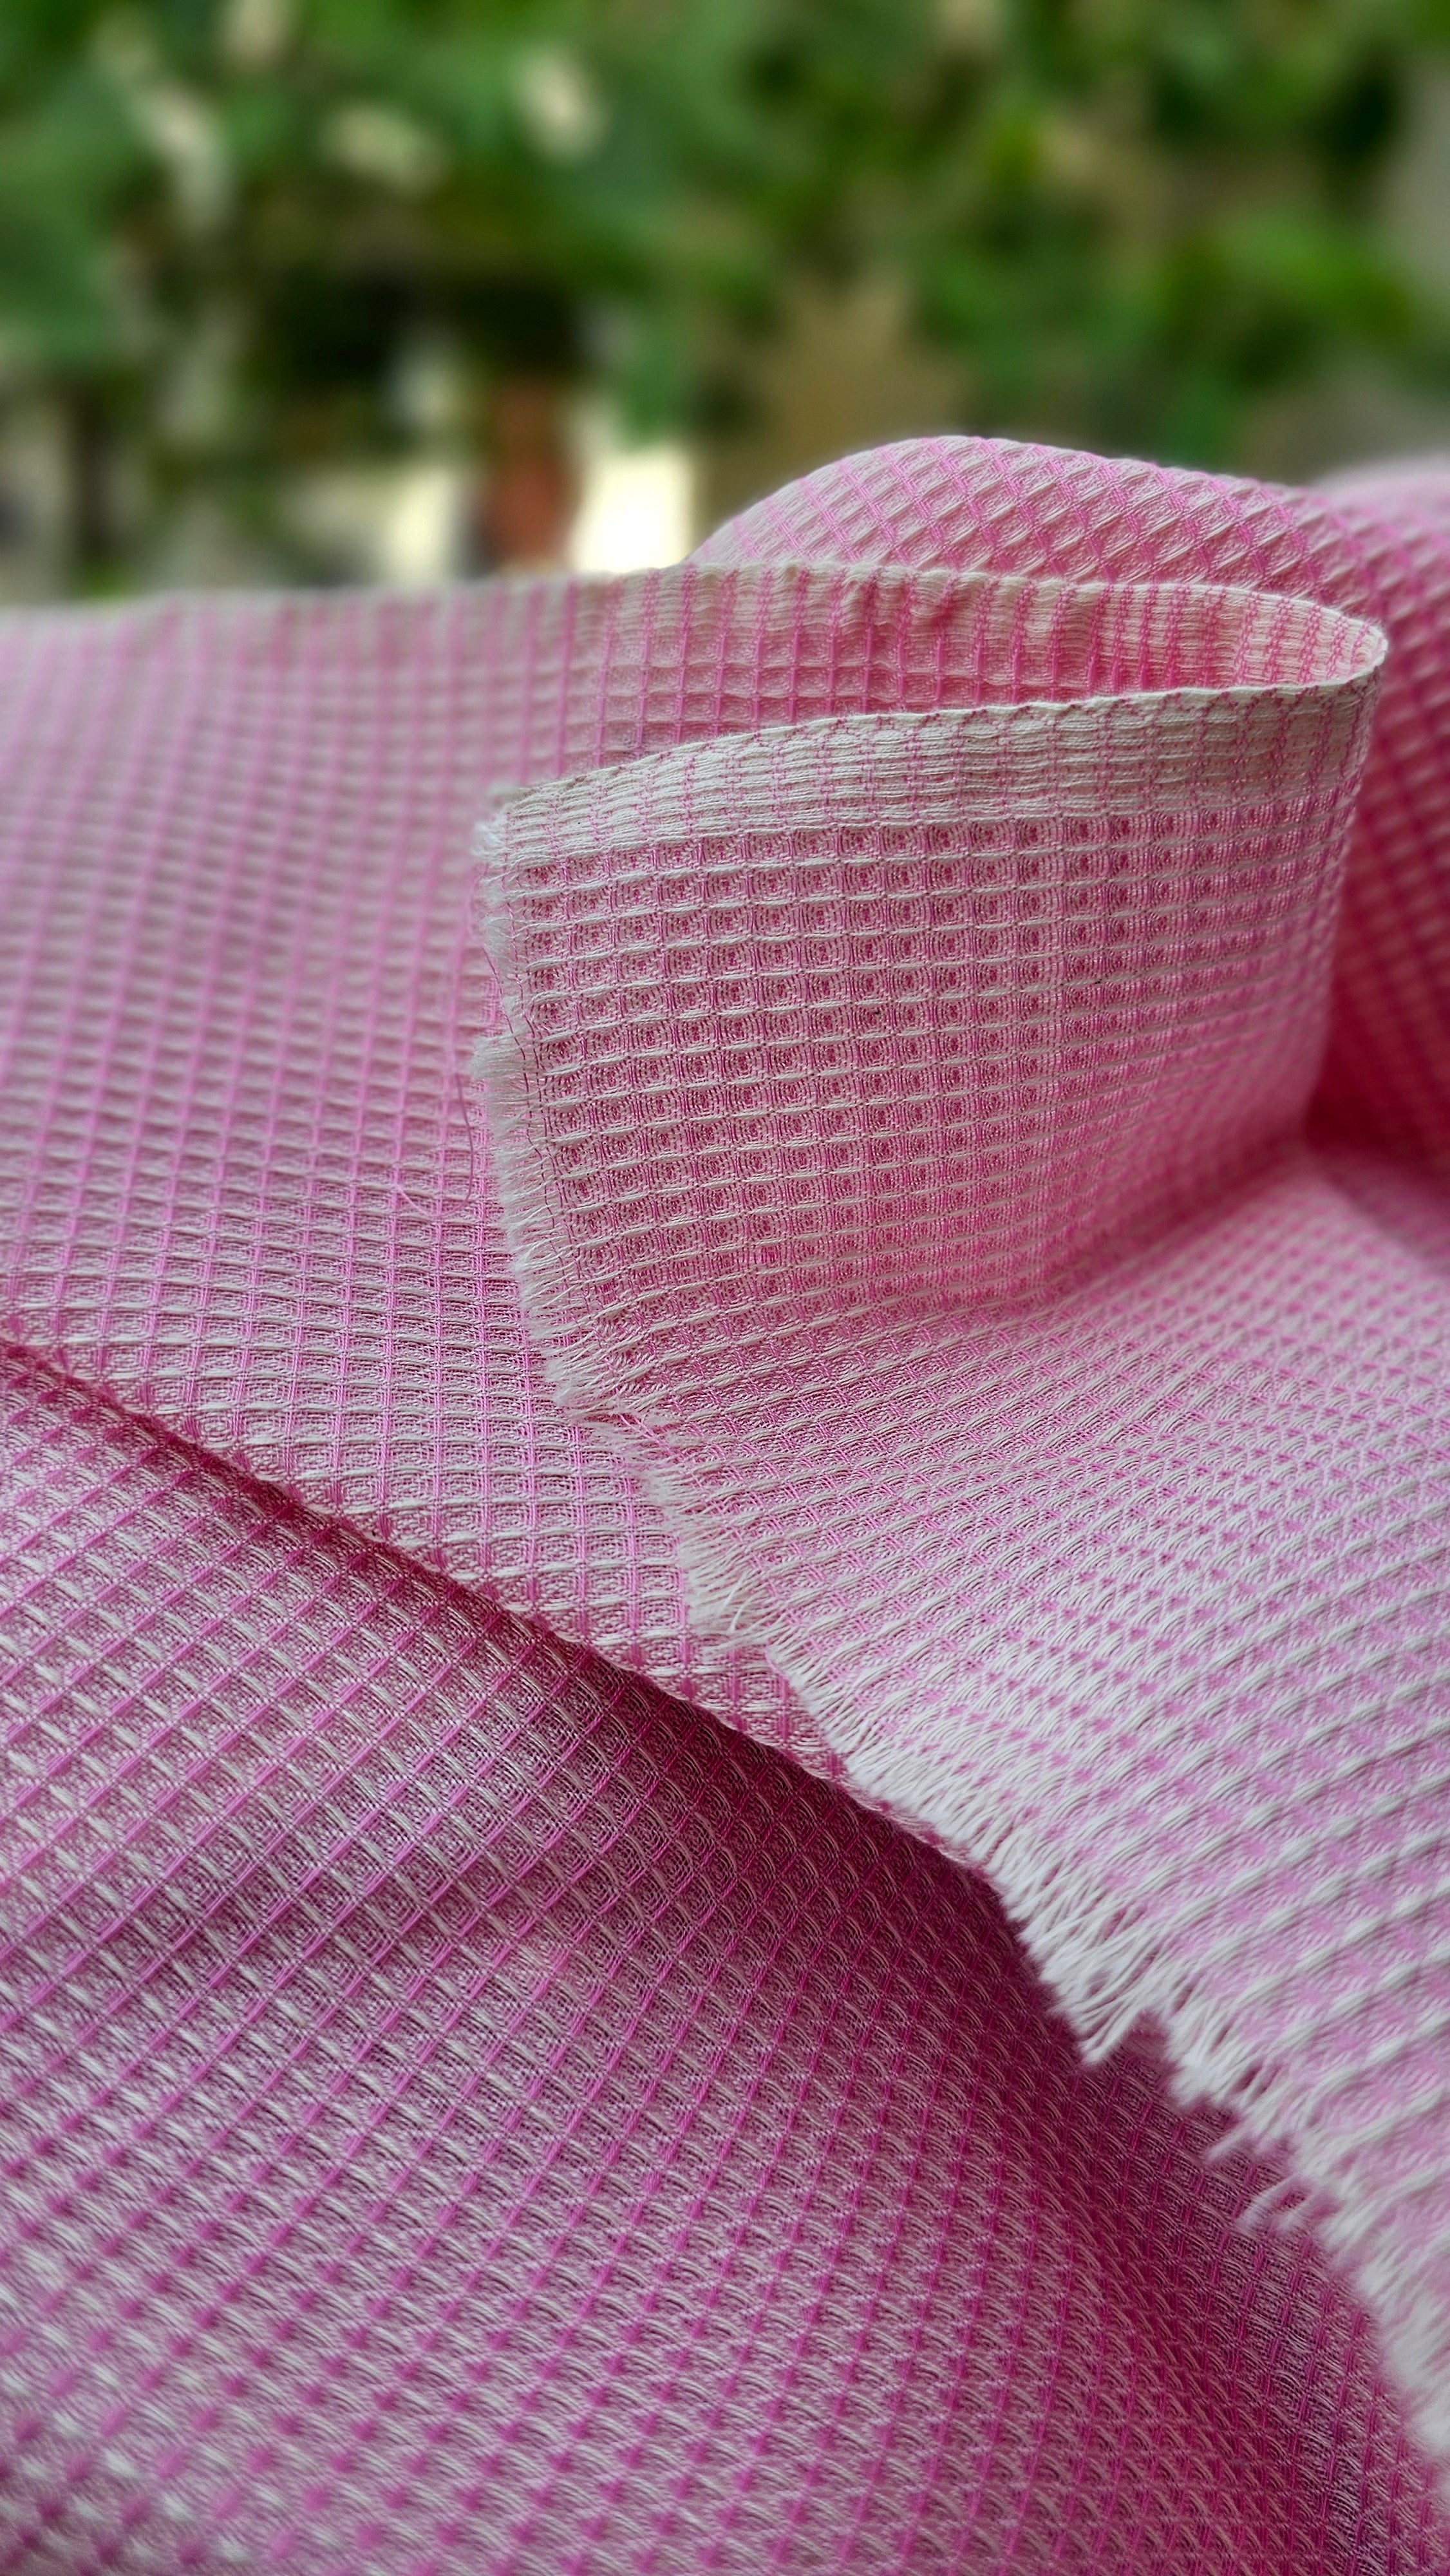 Fabric in Cotton woven on 6 pedal Handloom.